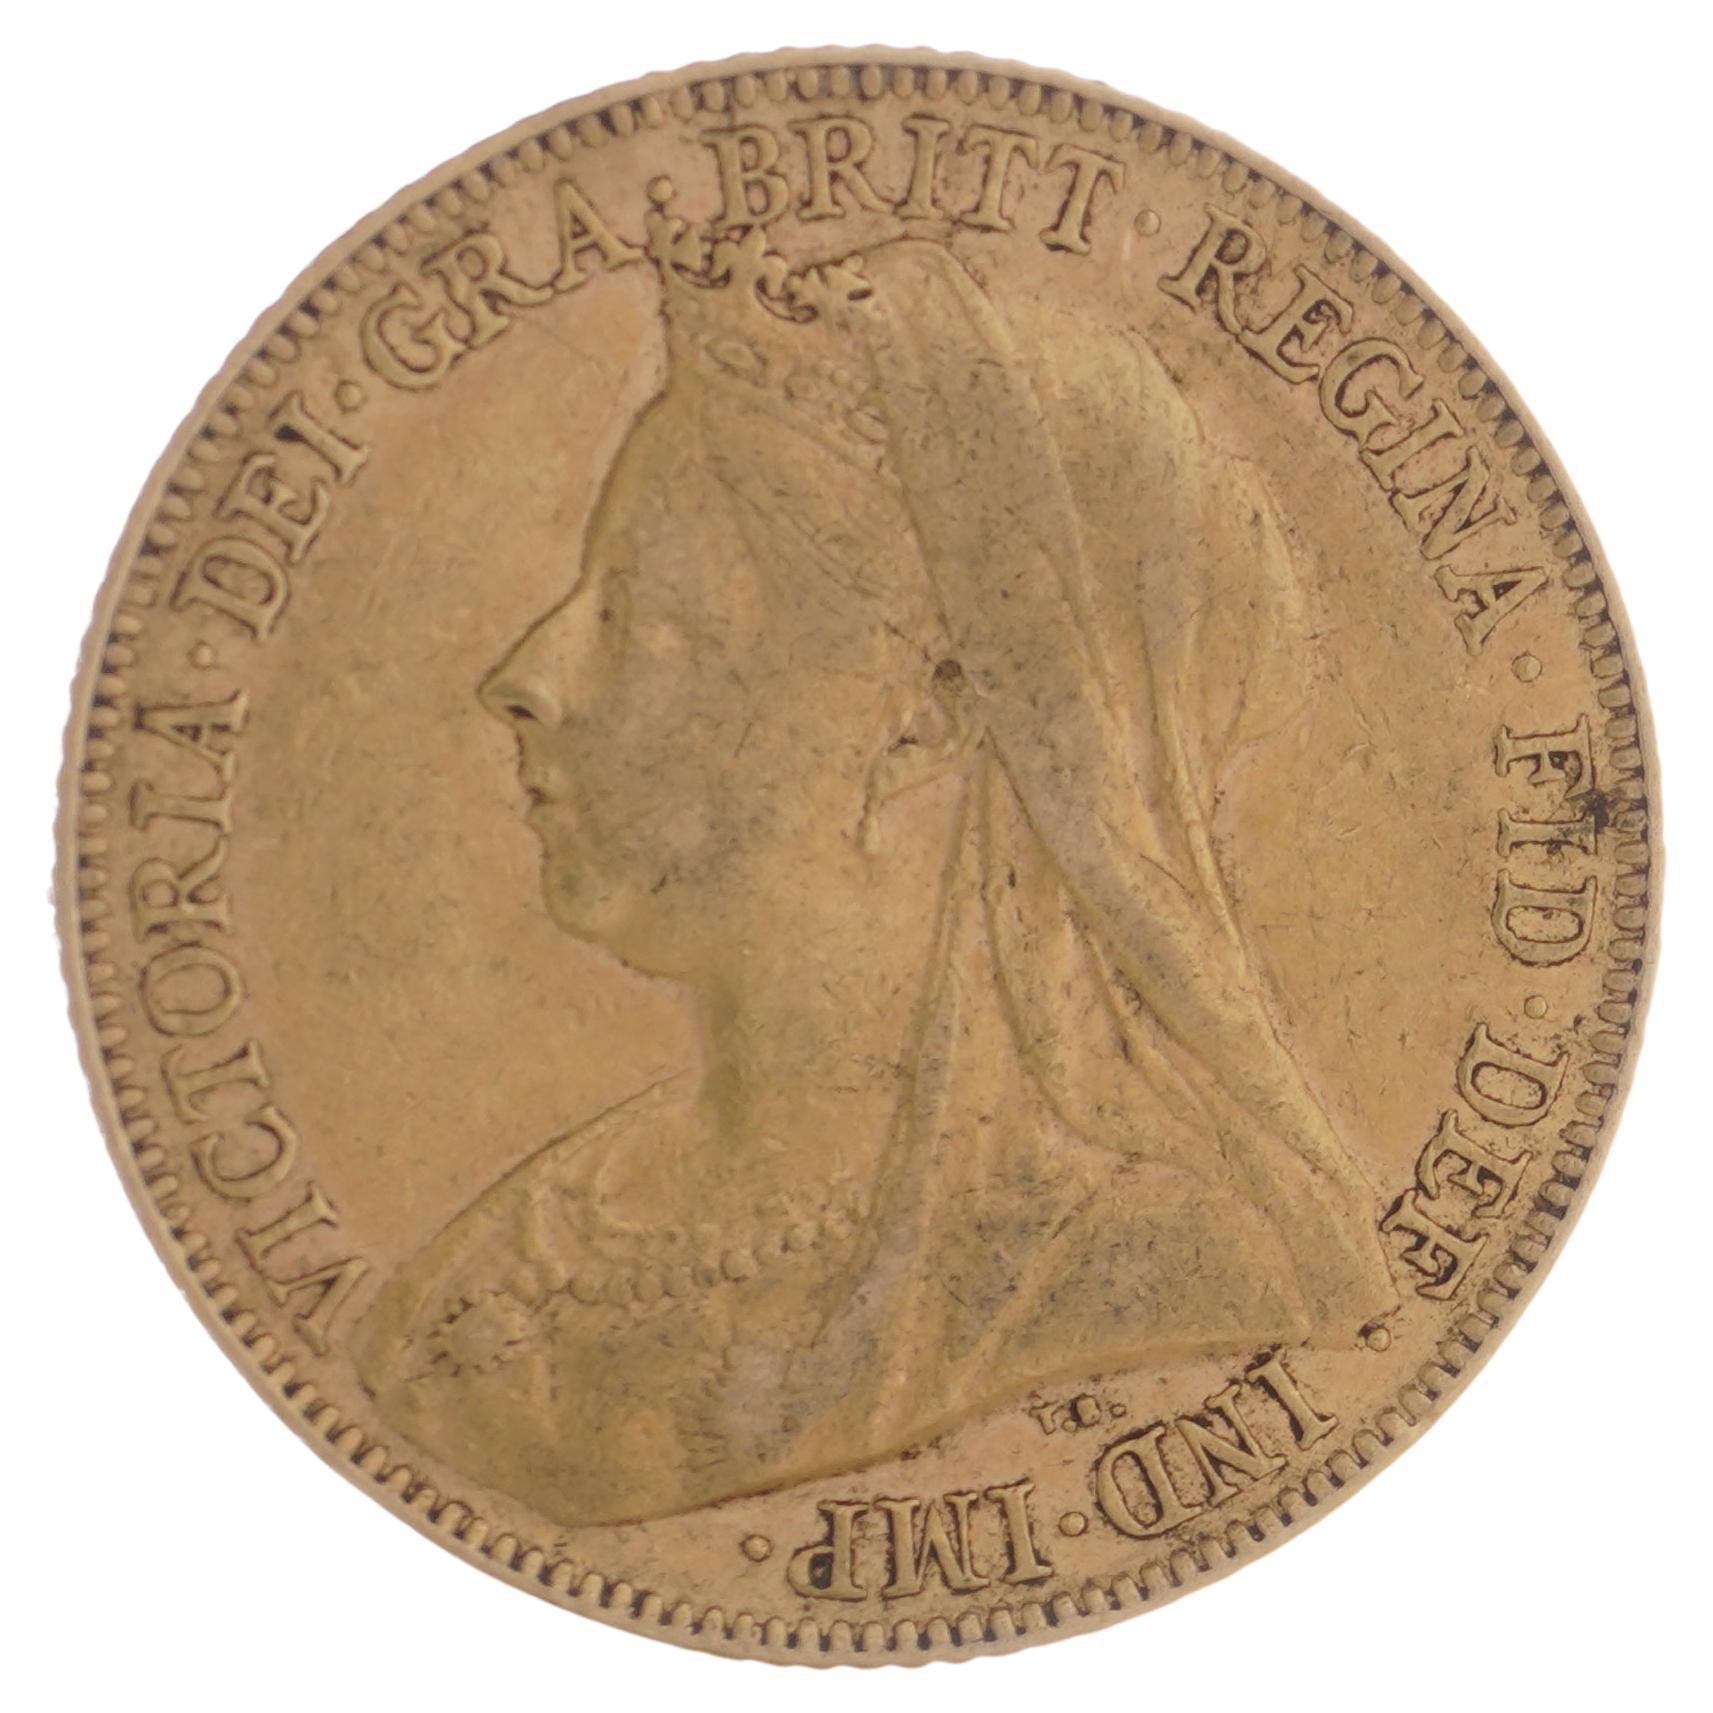 1900 gold Sovereign - with the Queen Victoria old (Veiled) head design